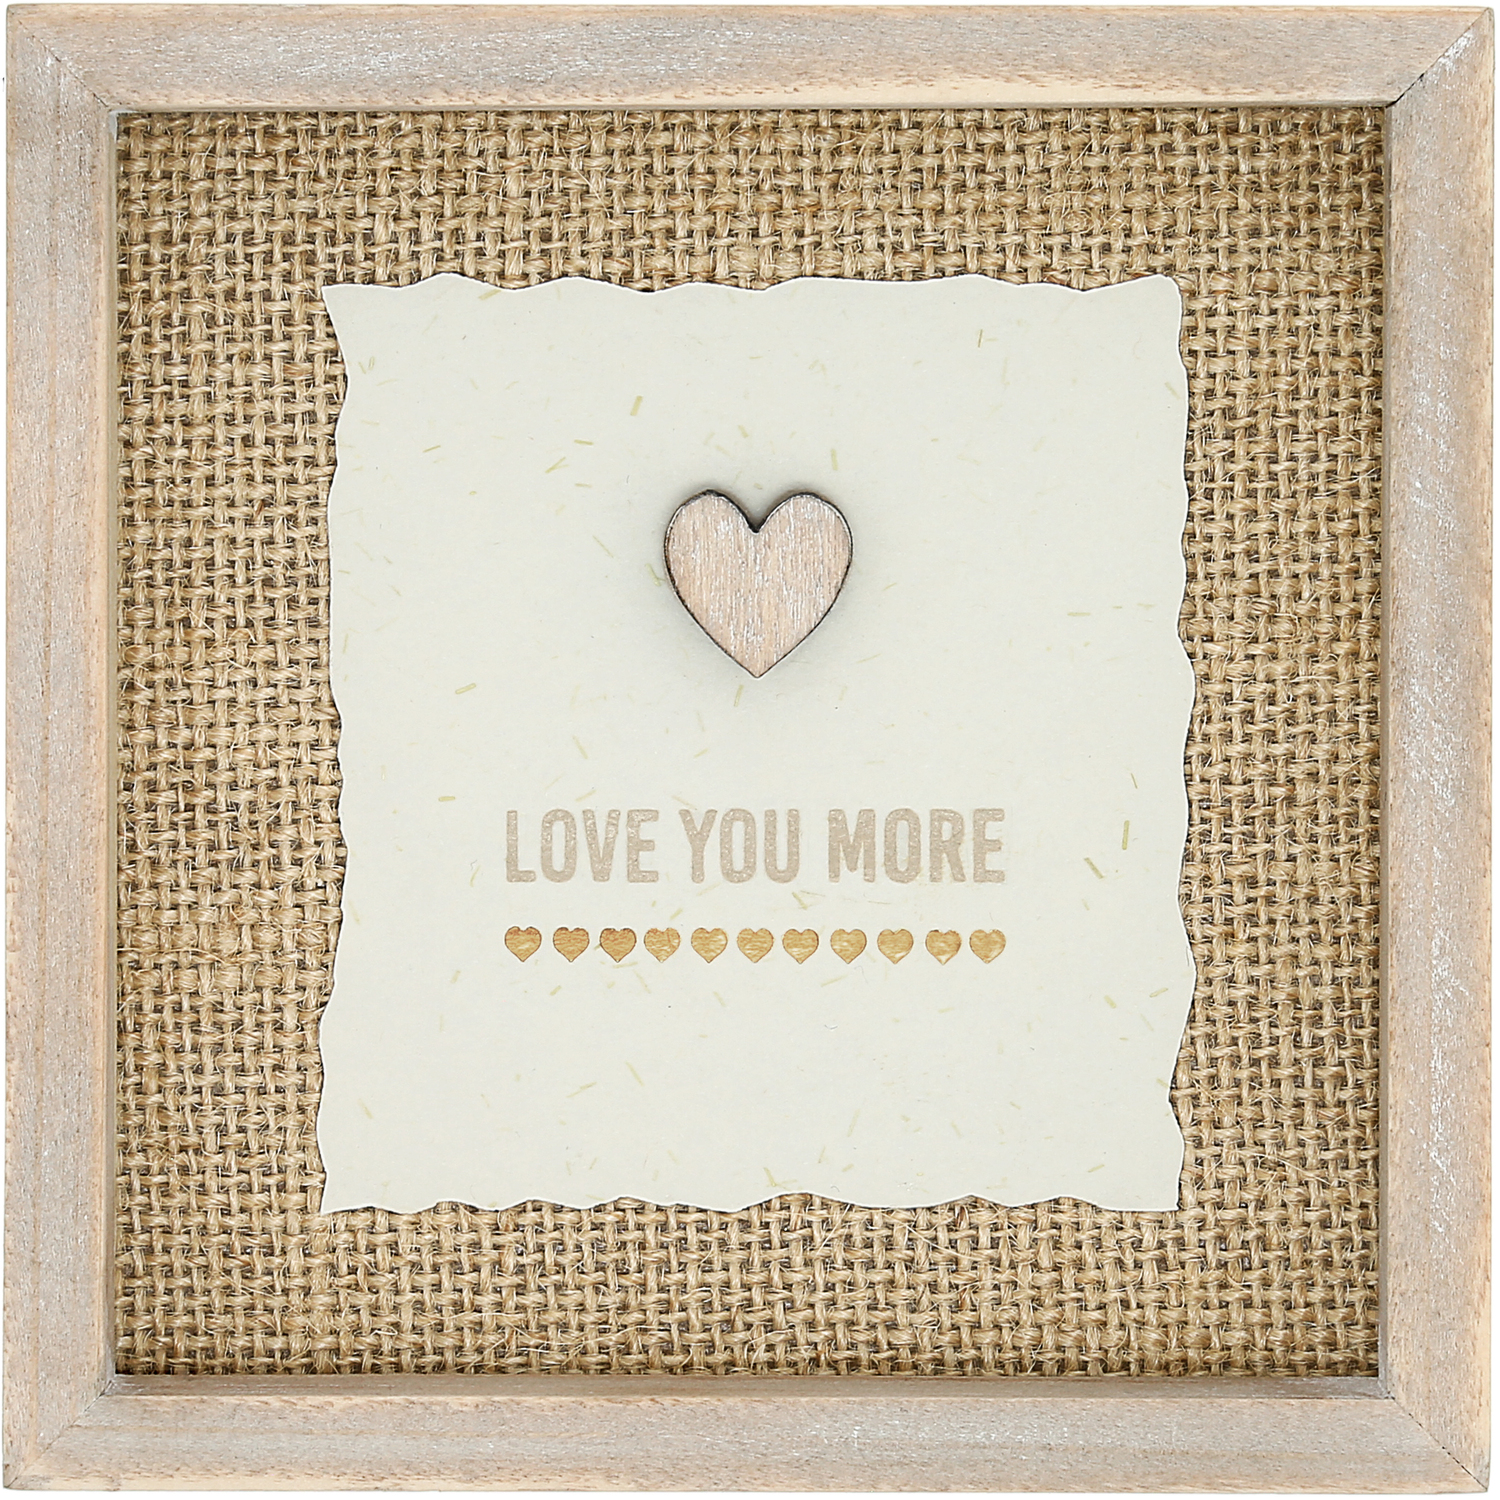 Love You More by Love You - Love You More - 5" MDF Plaque